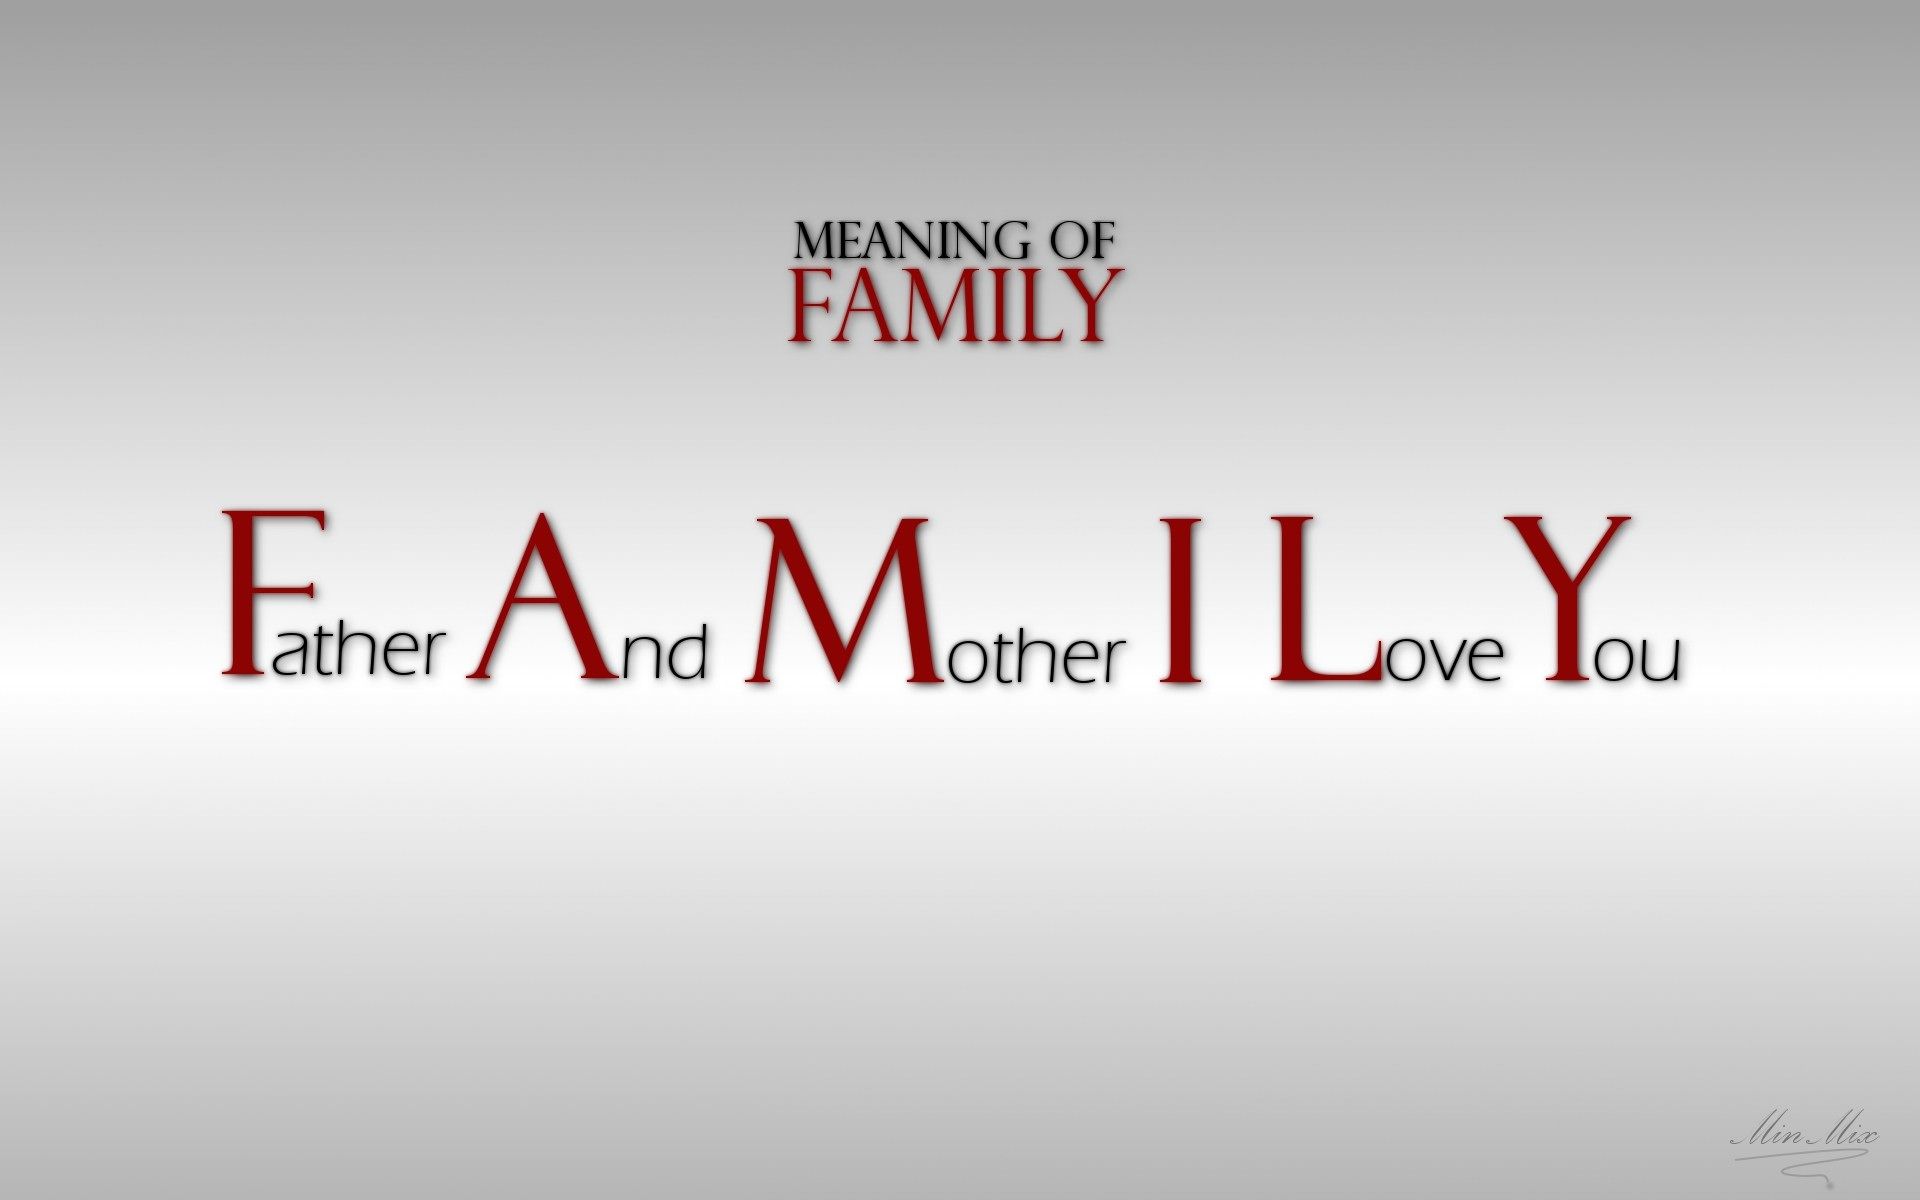 Love family hd s on